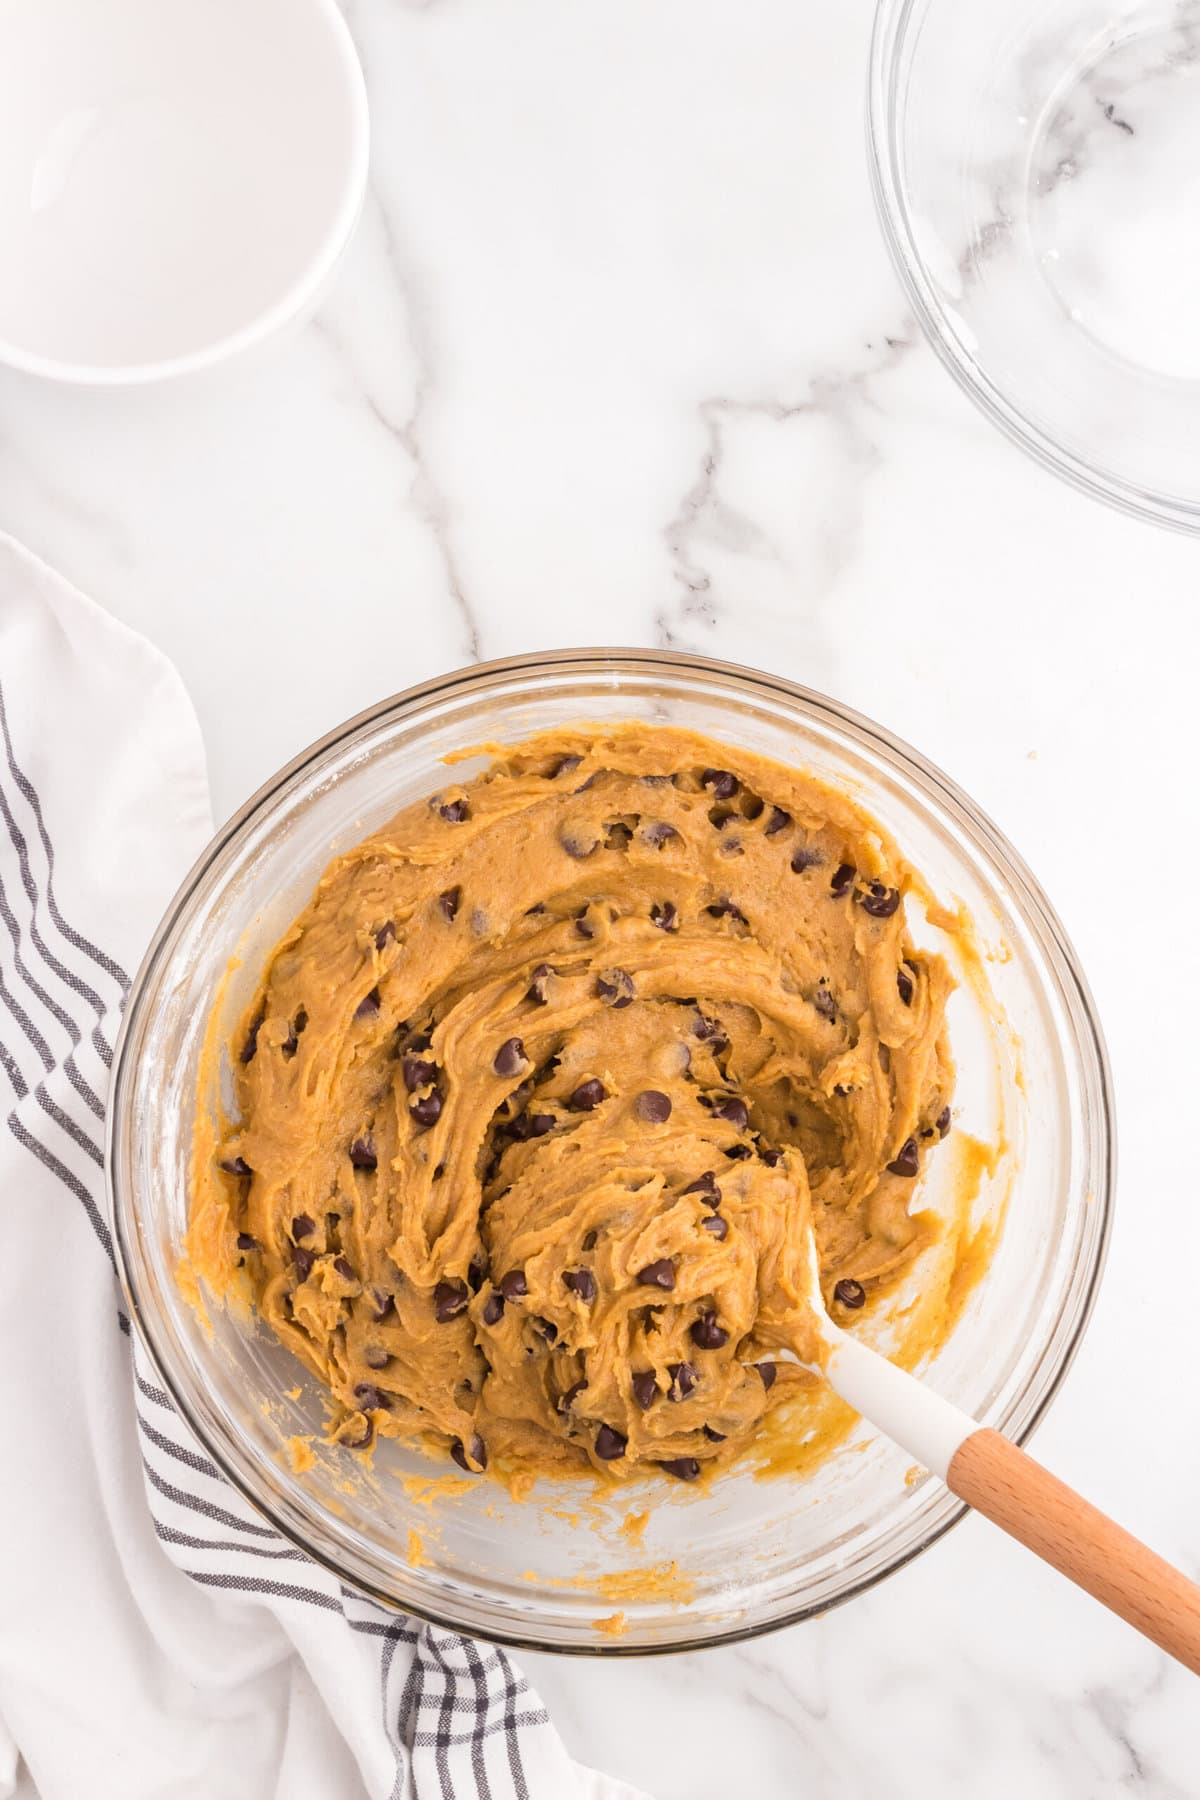 Pumpkin Chocolate Chip Cookies dough in mixing bowl with spoon